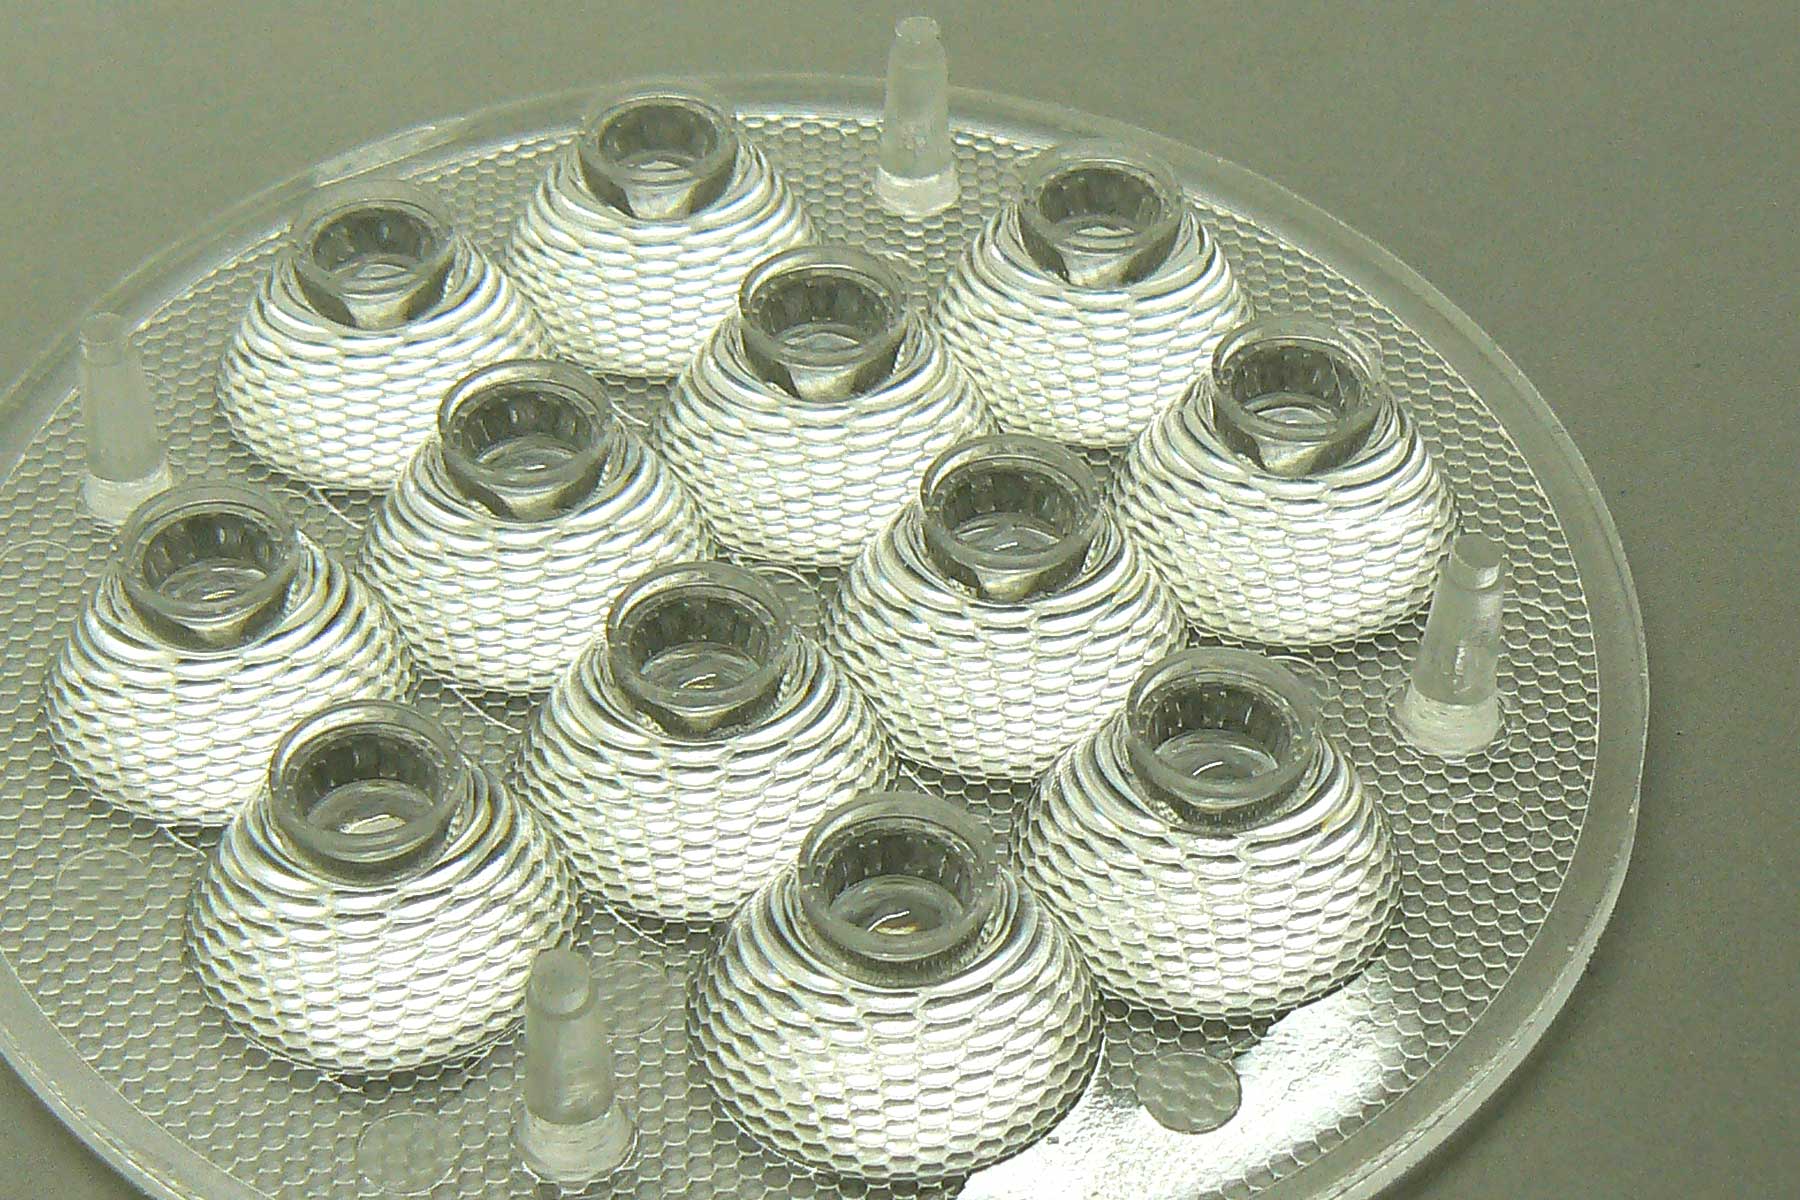 injected pmma lens array